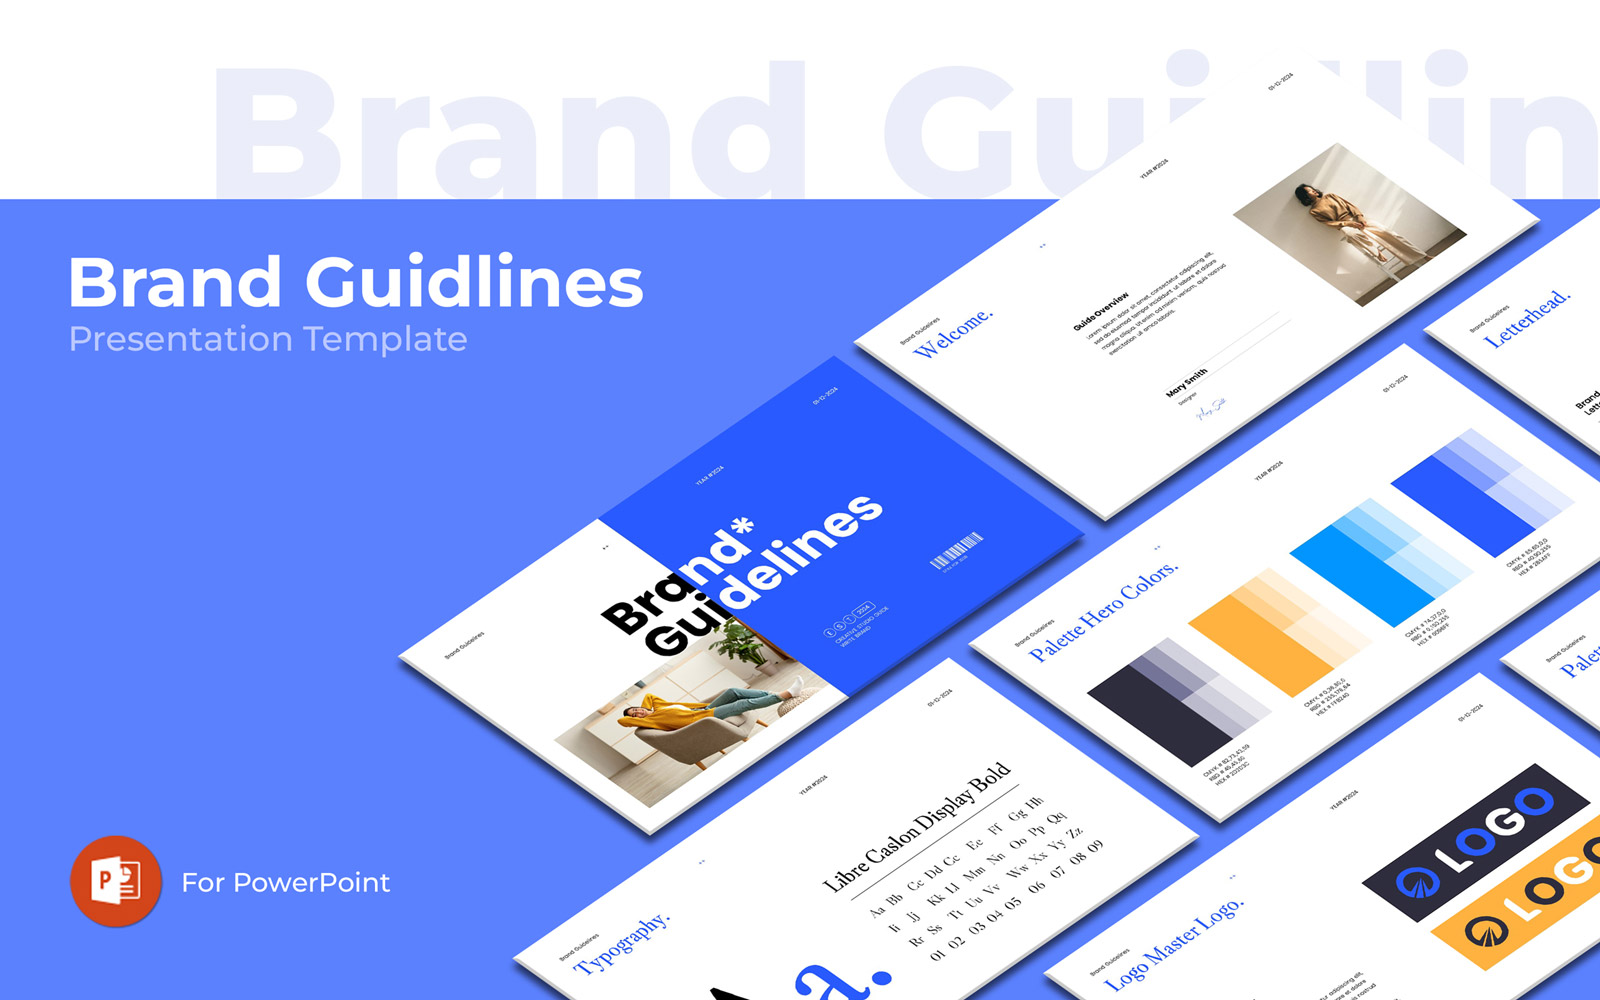 Brand Guidelines Template PowerPoint Layout